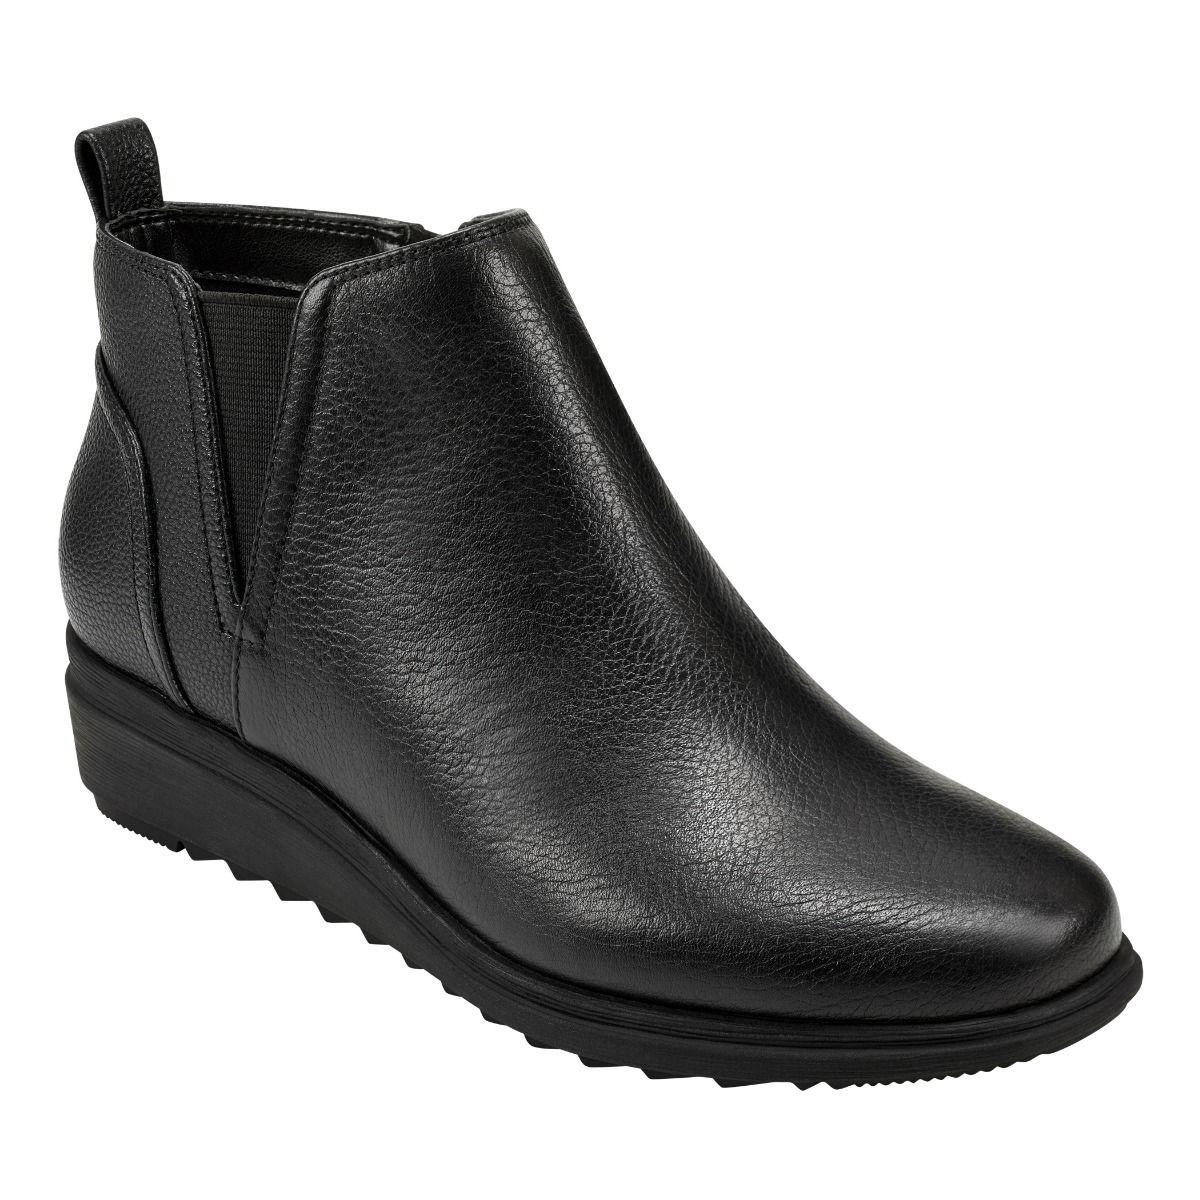 Easy Spirit Synthetic Yvonne Booties in Black Leather (Black) - Lyst